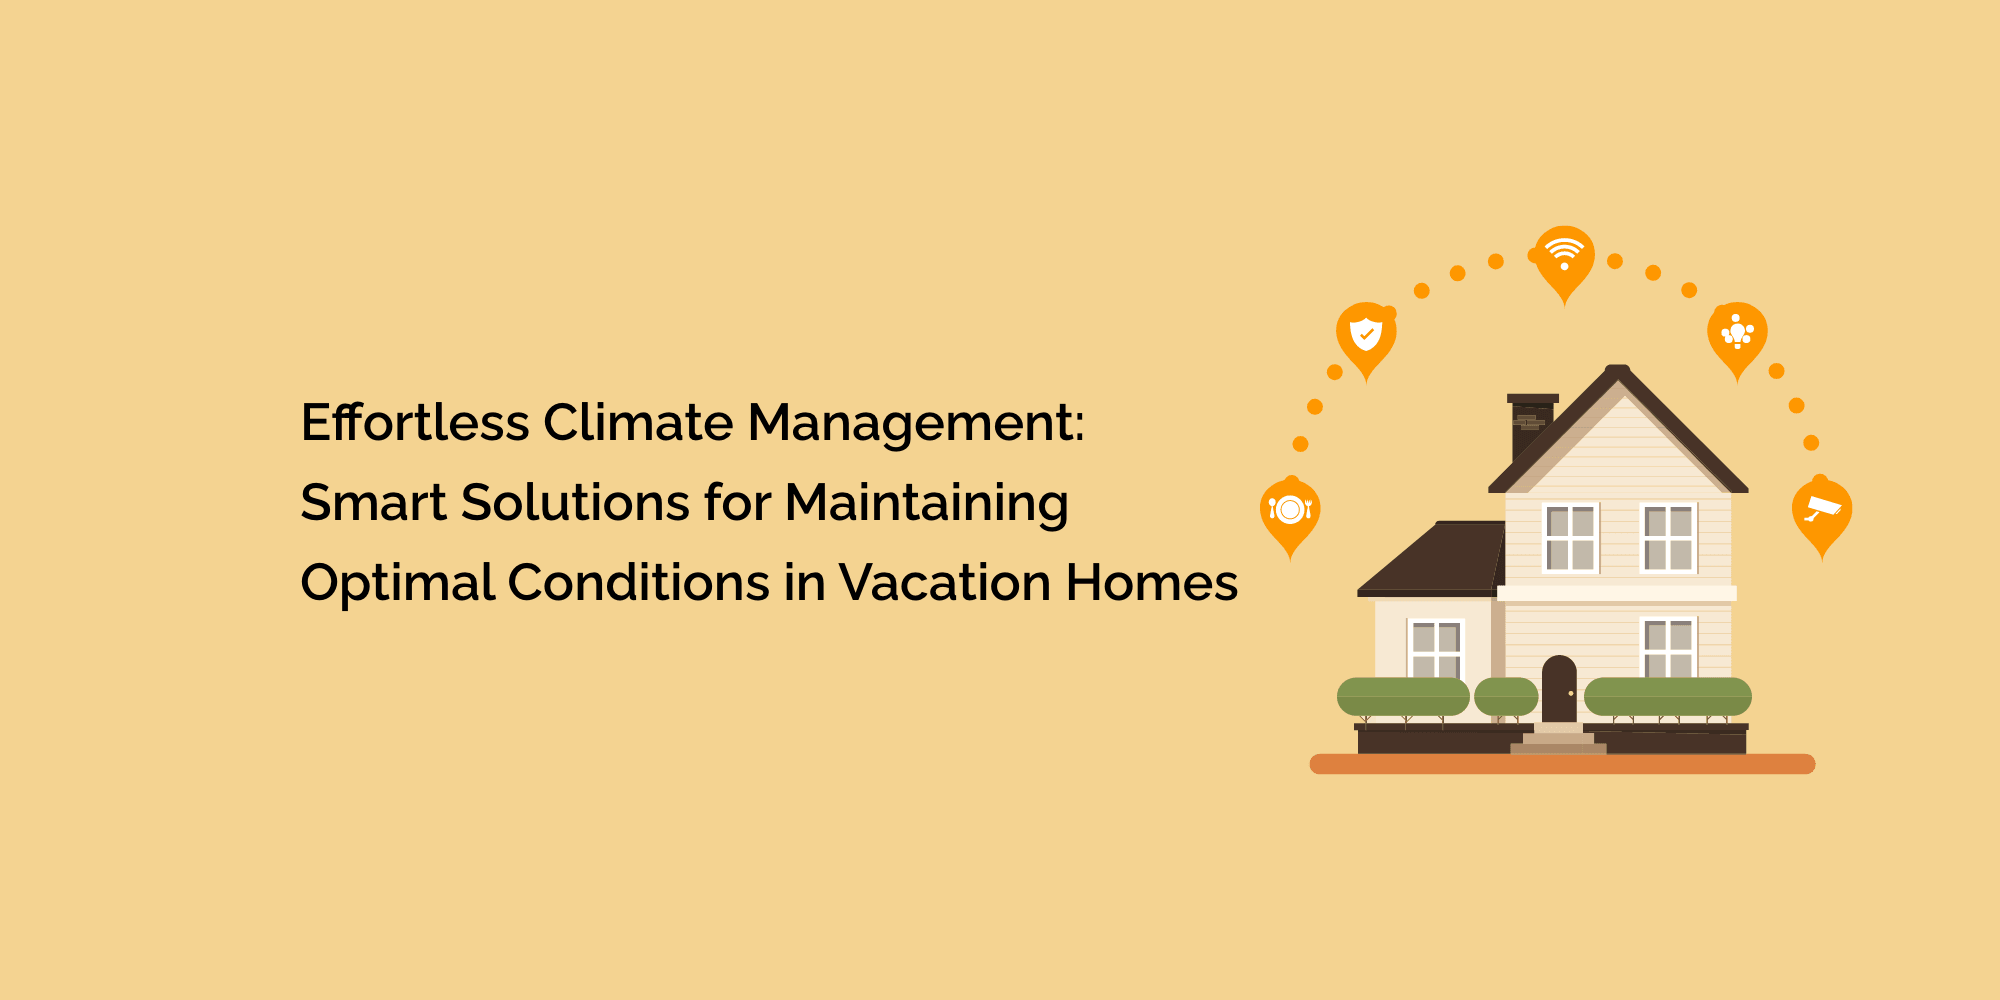 Effortless Climate Management: Smart Solutions for Maintaining Optimal Conditions in Vacation Homes